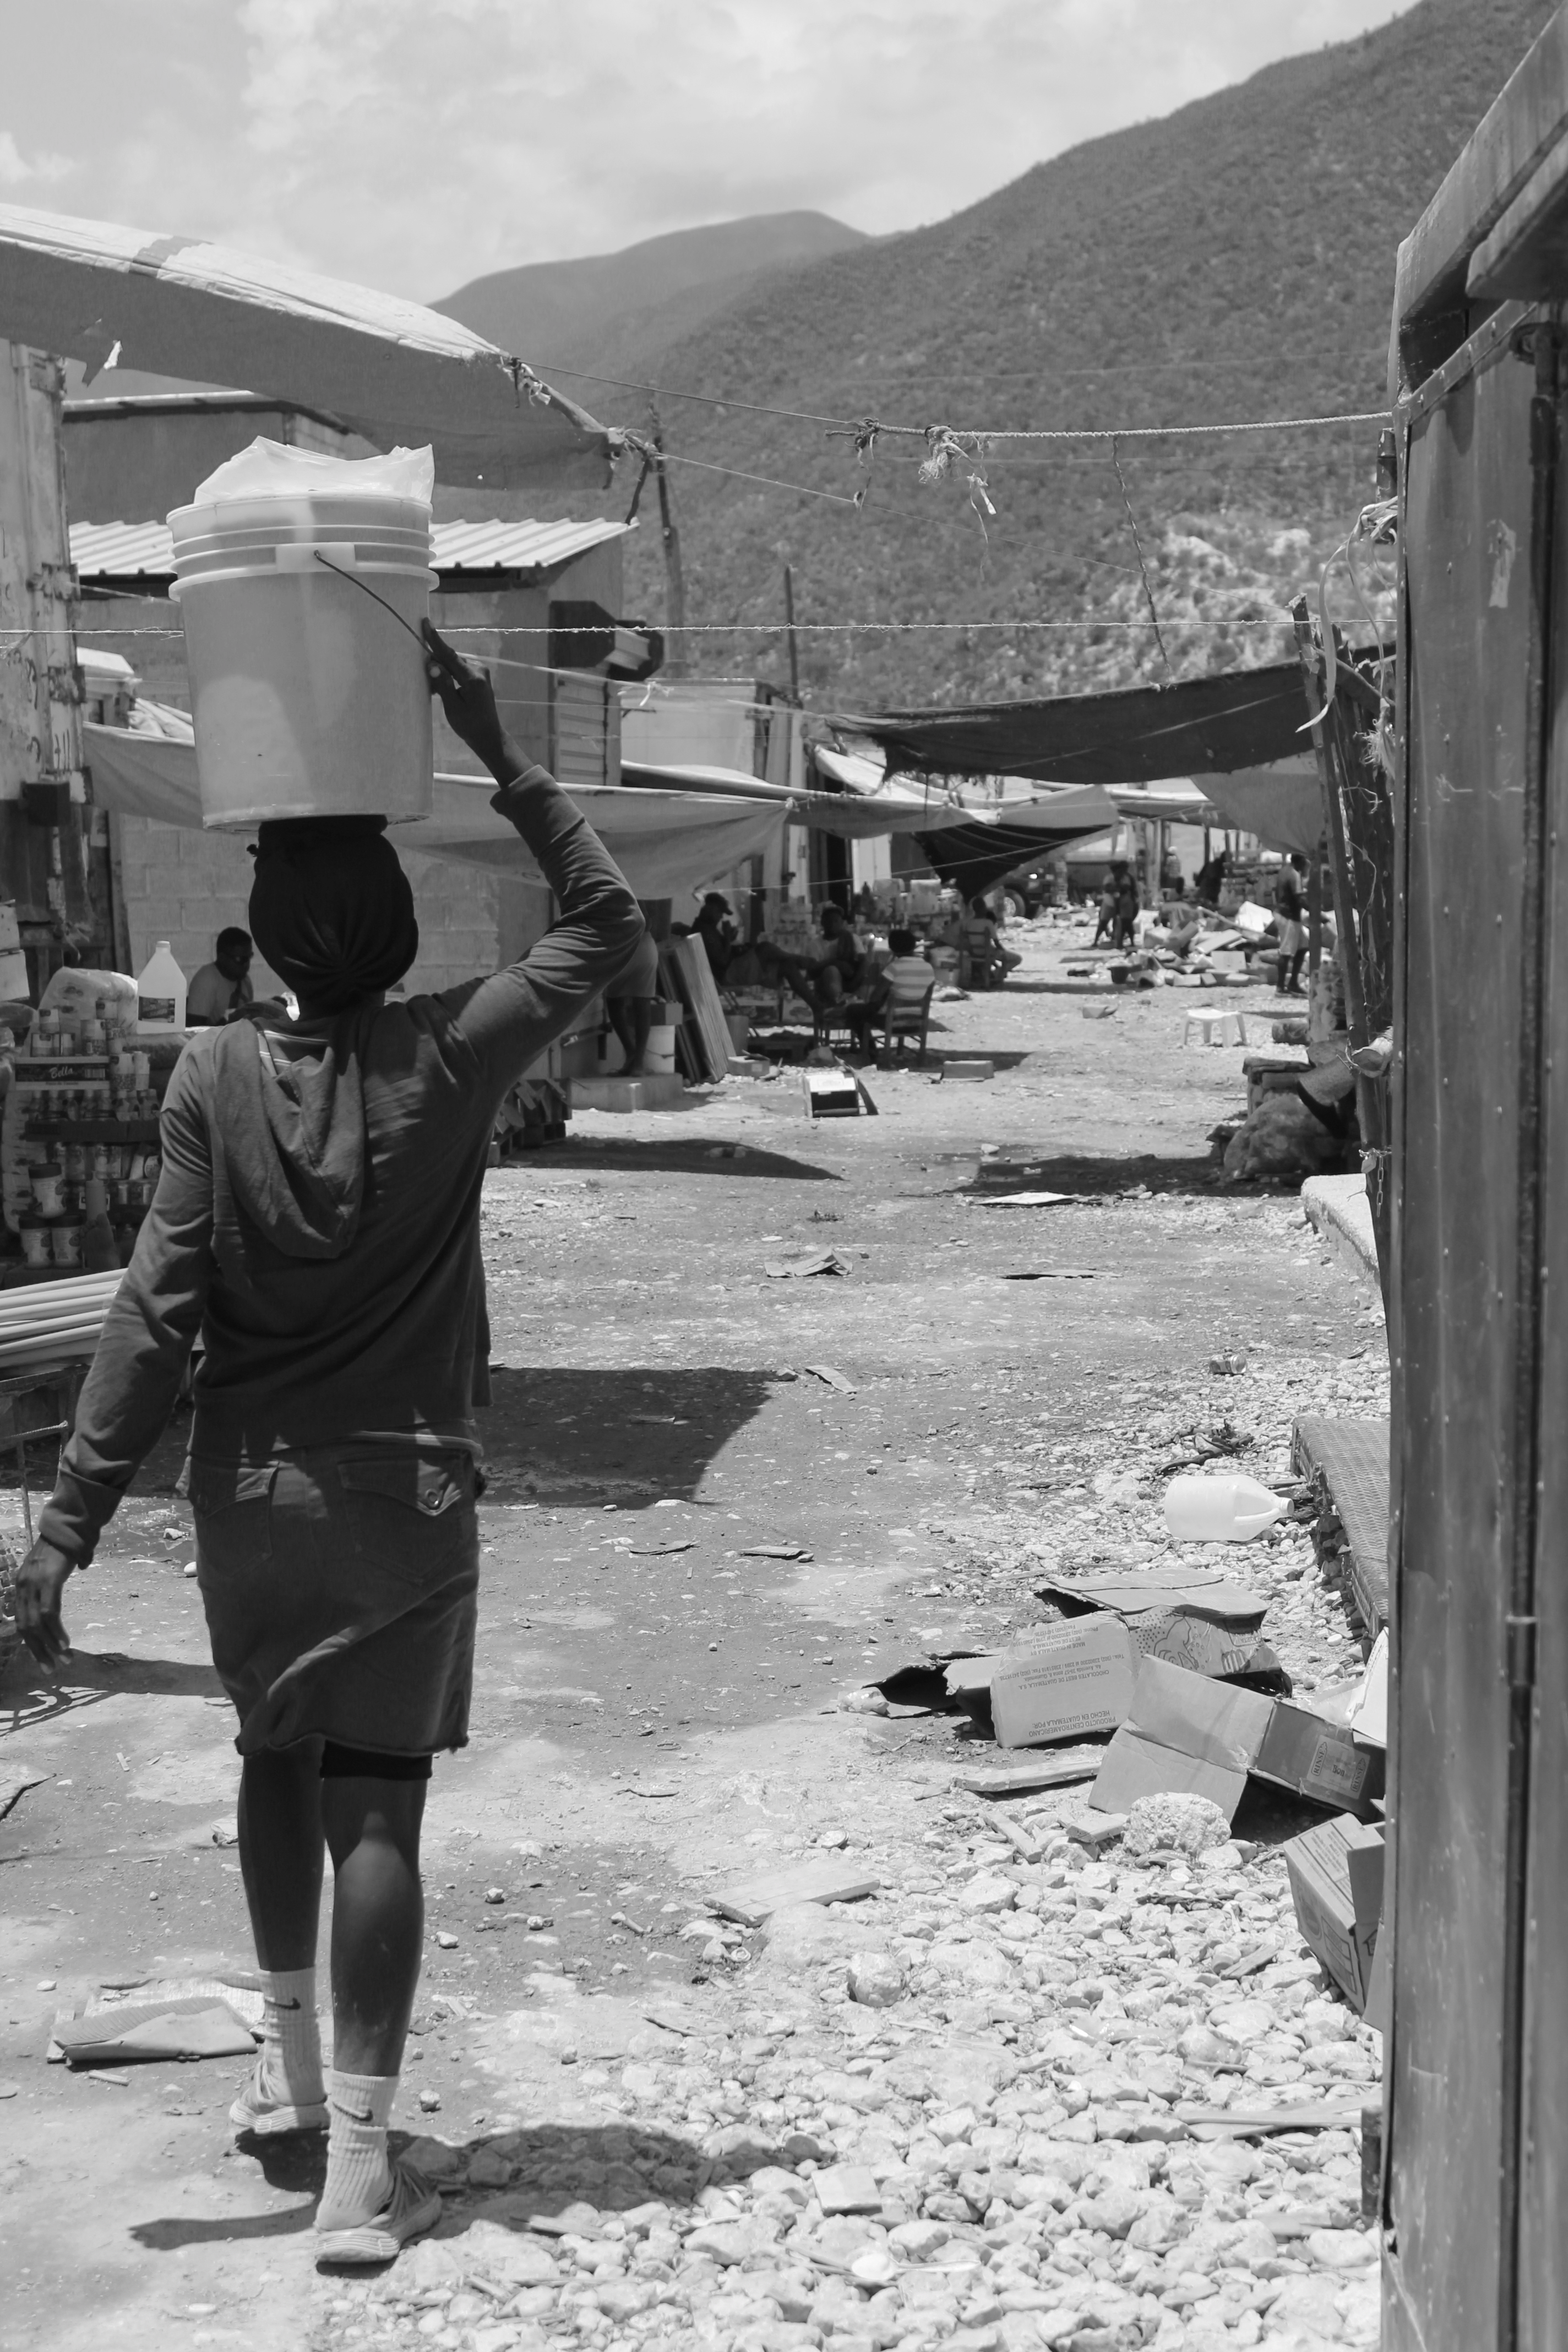 A woman carrying a bucket on her head filled with contents as she walks along the main road leading to the border crossing station.